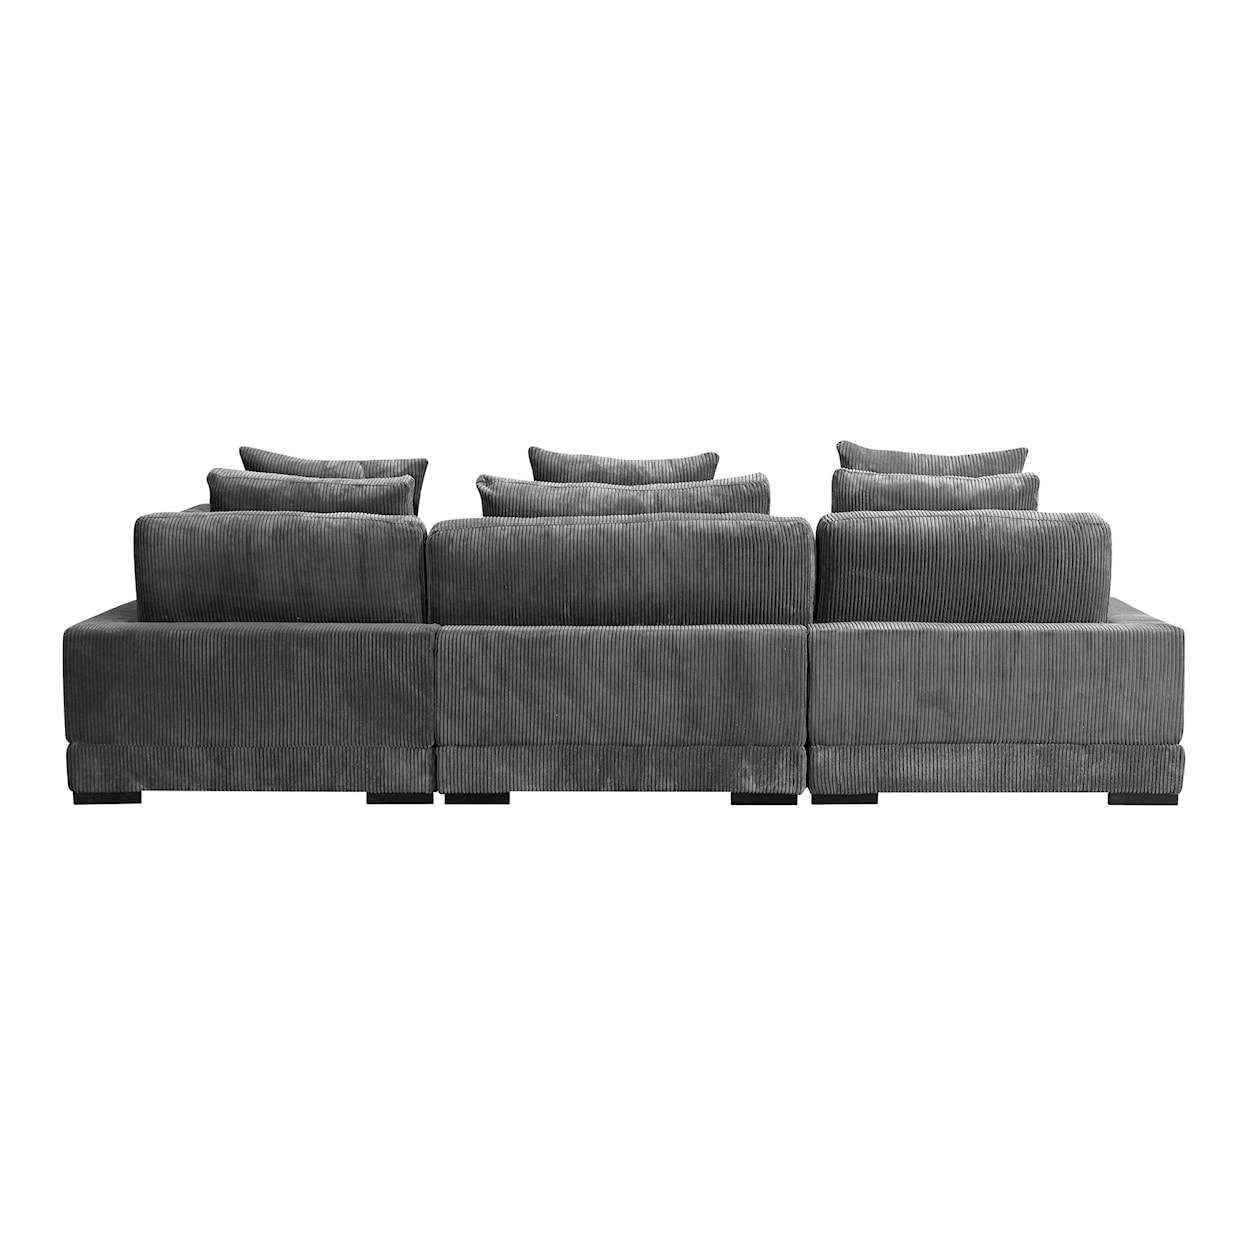 Moe's Home Collection Tumble Tumble Dream Modular Sectional Charcoal